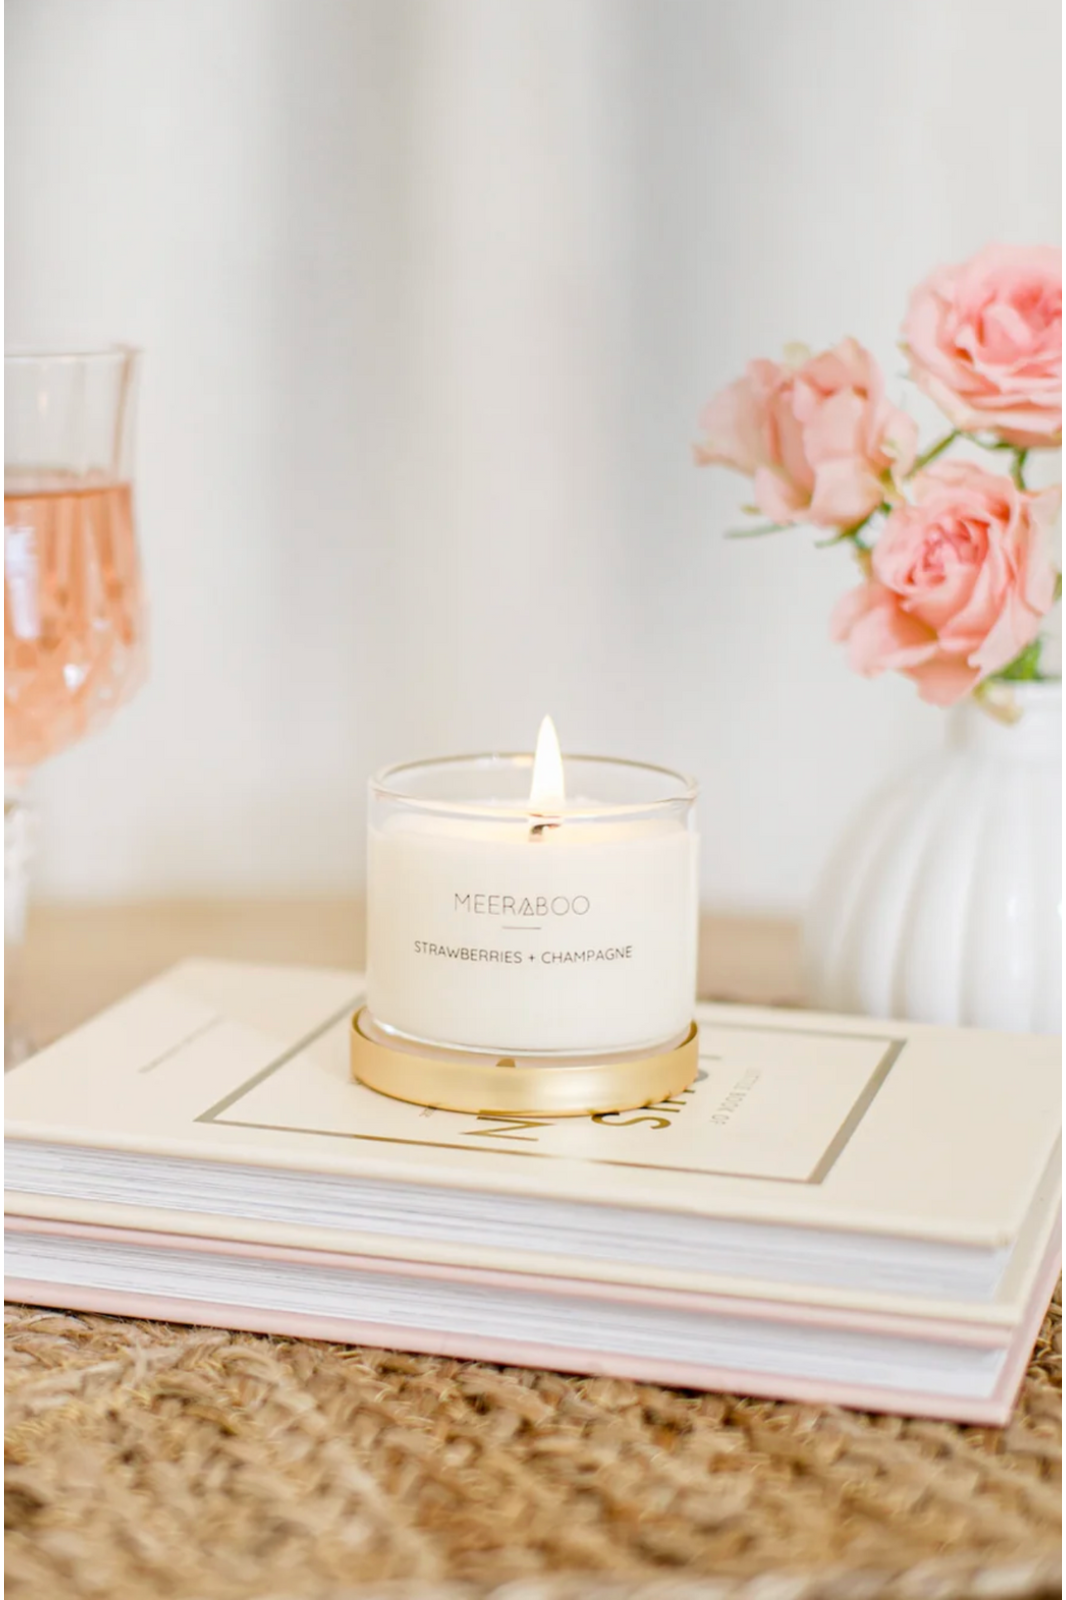 Meeraboo Candle Golden Girl Mini Candle in Strawberries + Champagne